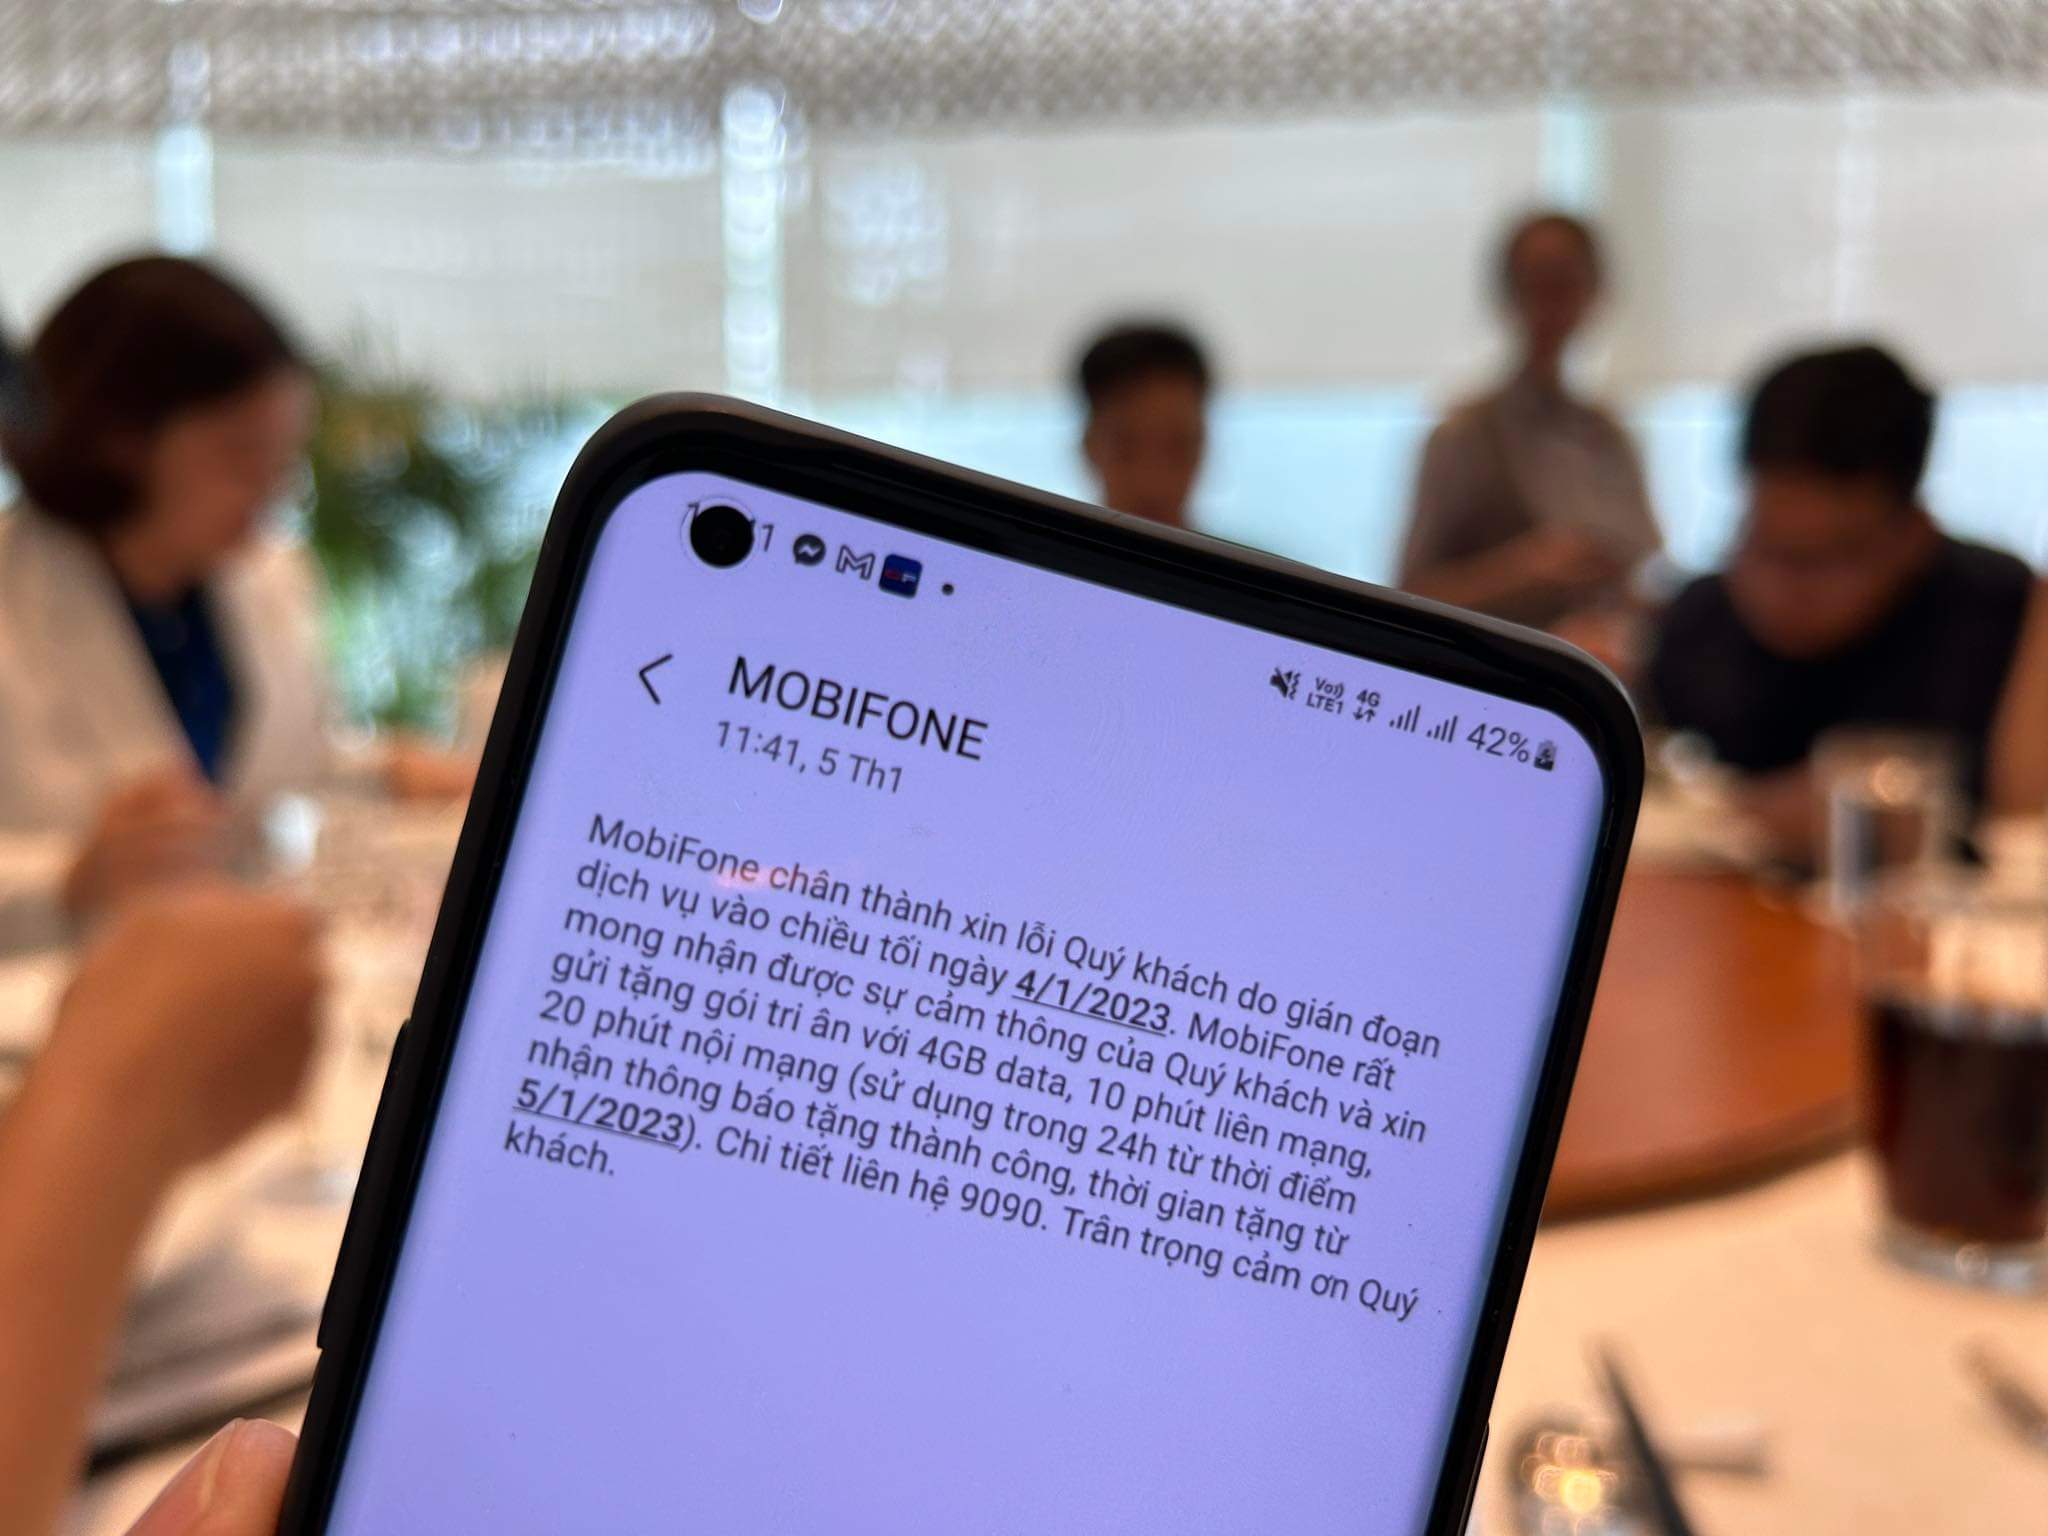 MobiFone apologizes, offers compensation for hour-long service disruption